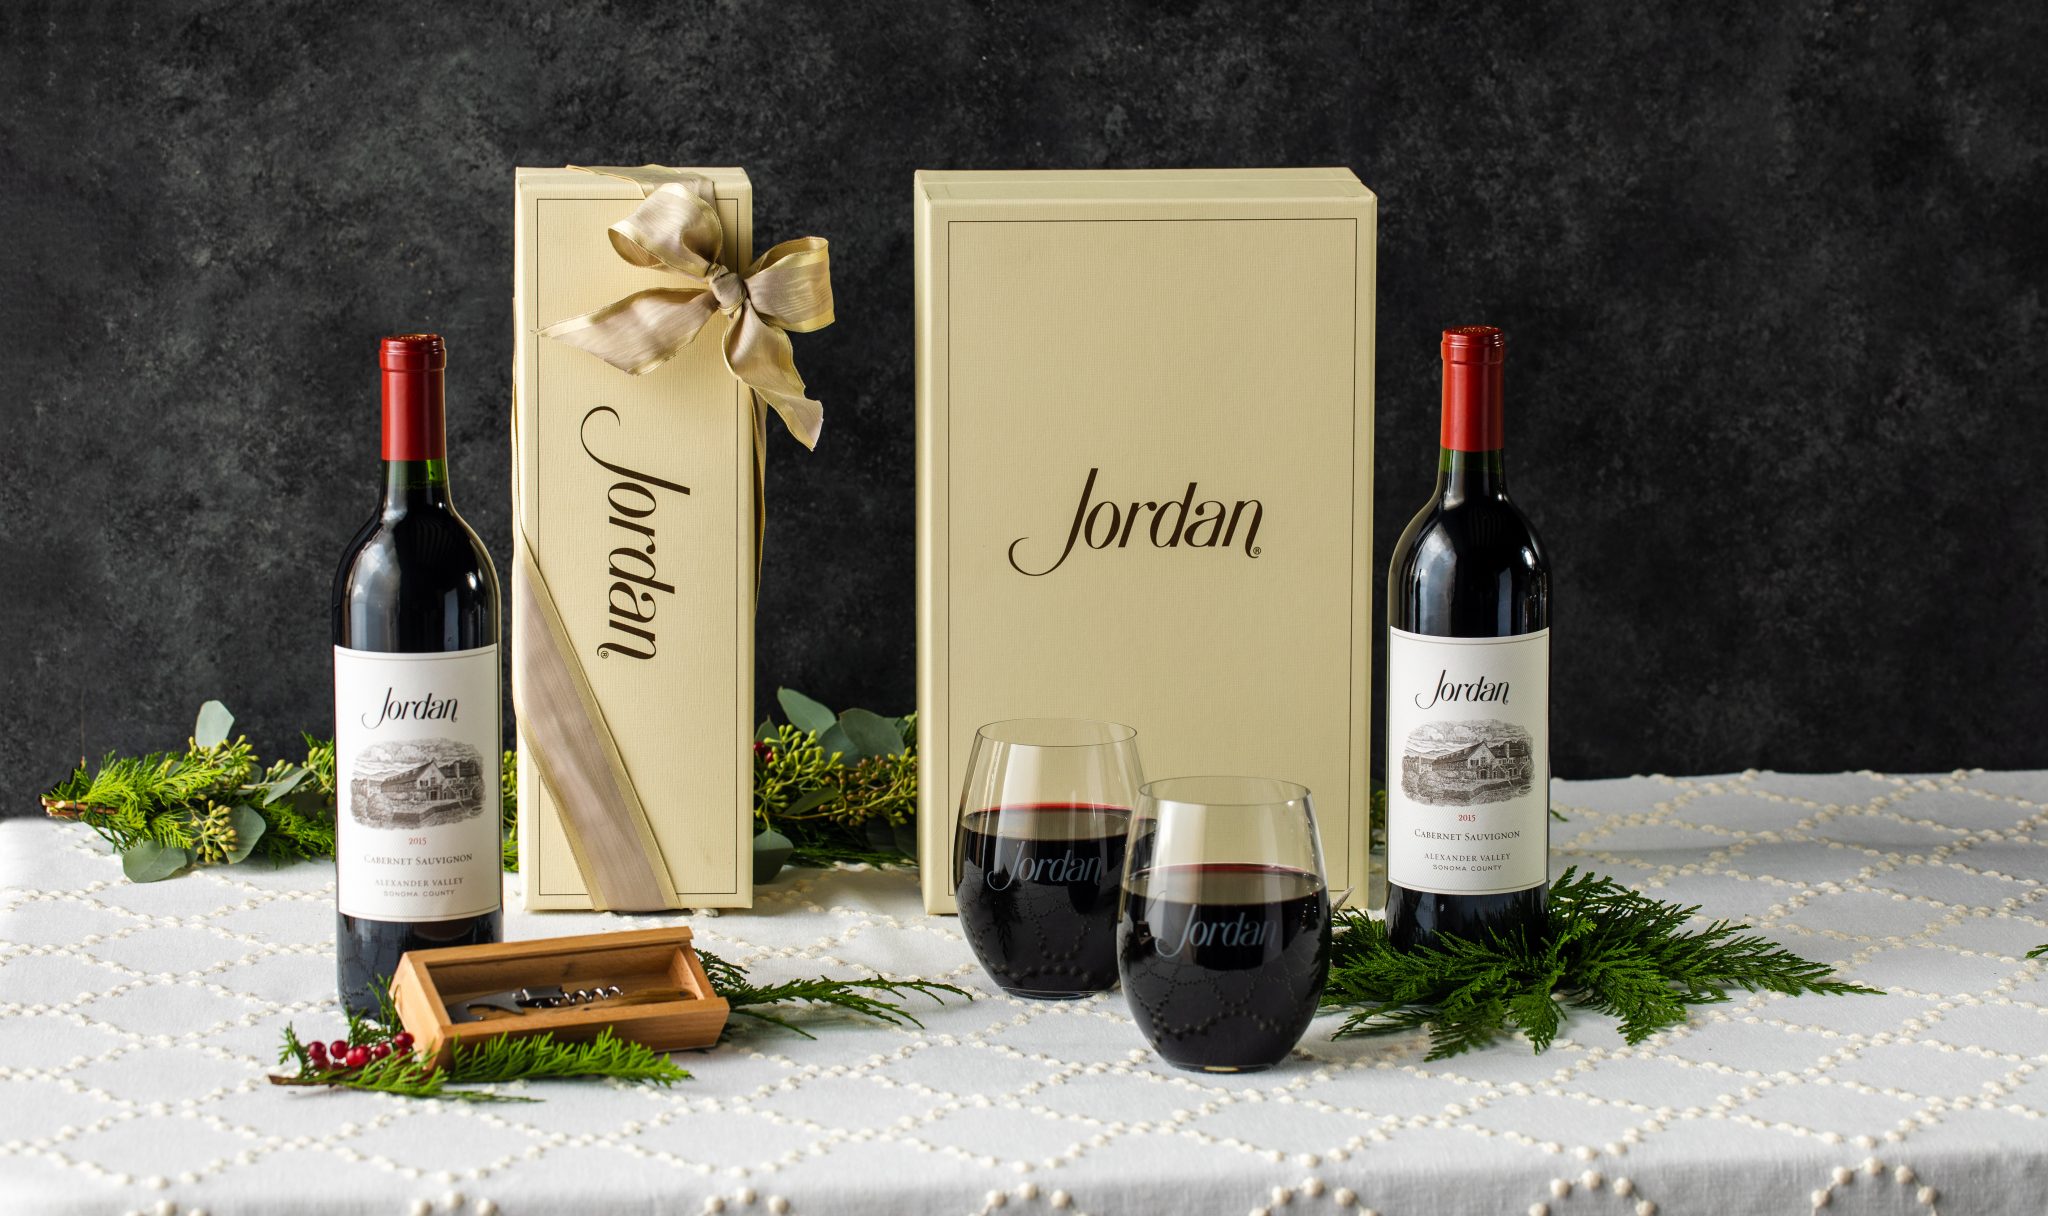 Jordan red wine with gift box ideas with wine glass and corkscrew